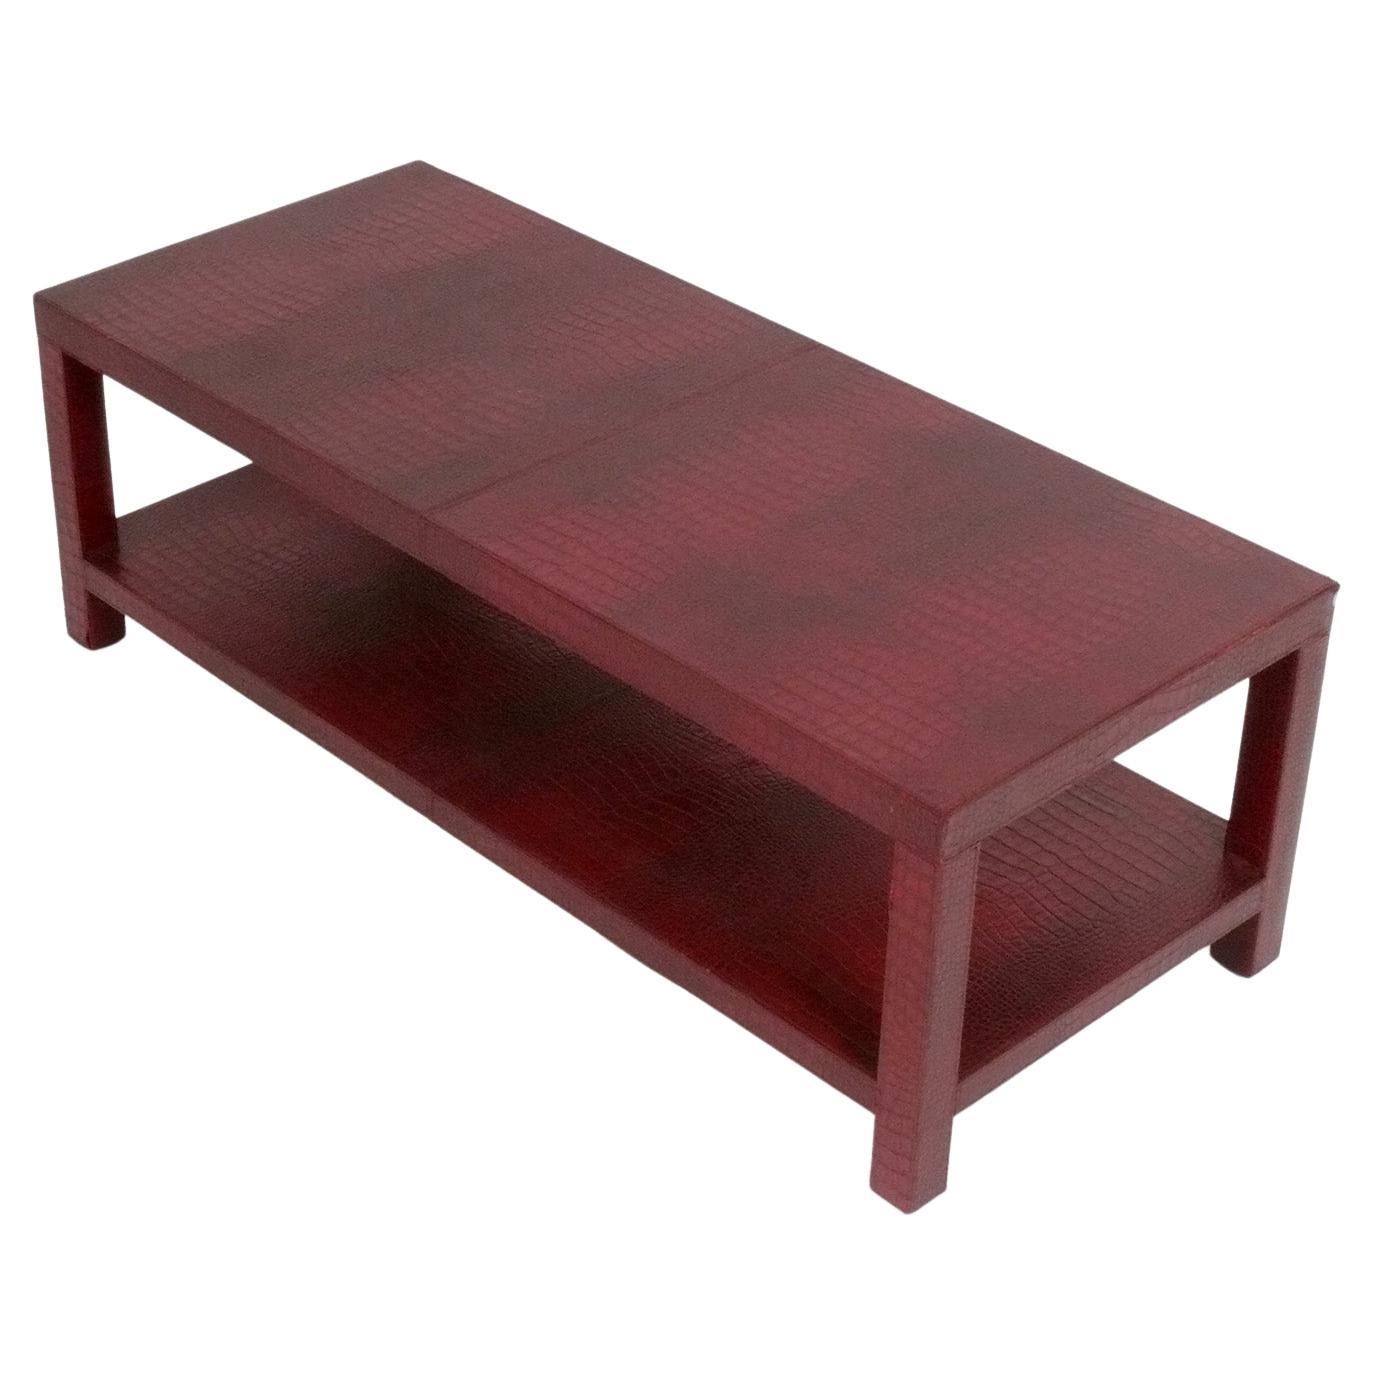 French Faux Alligator Embossed Red Leather Coffee Table by Dominic Chambon For Sale